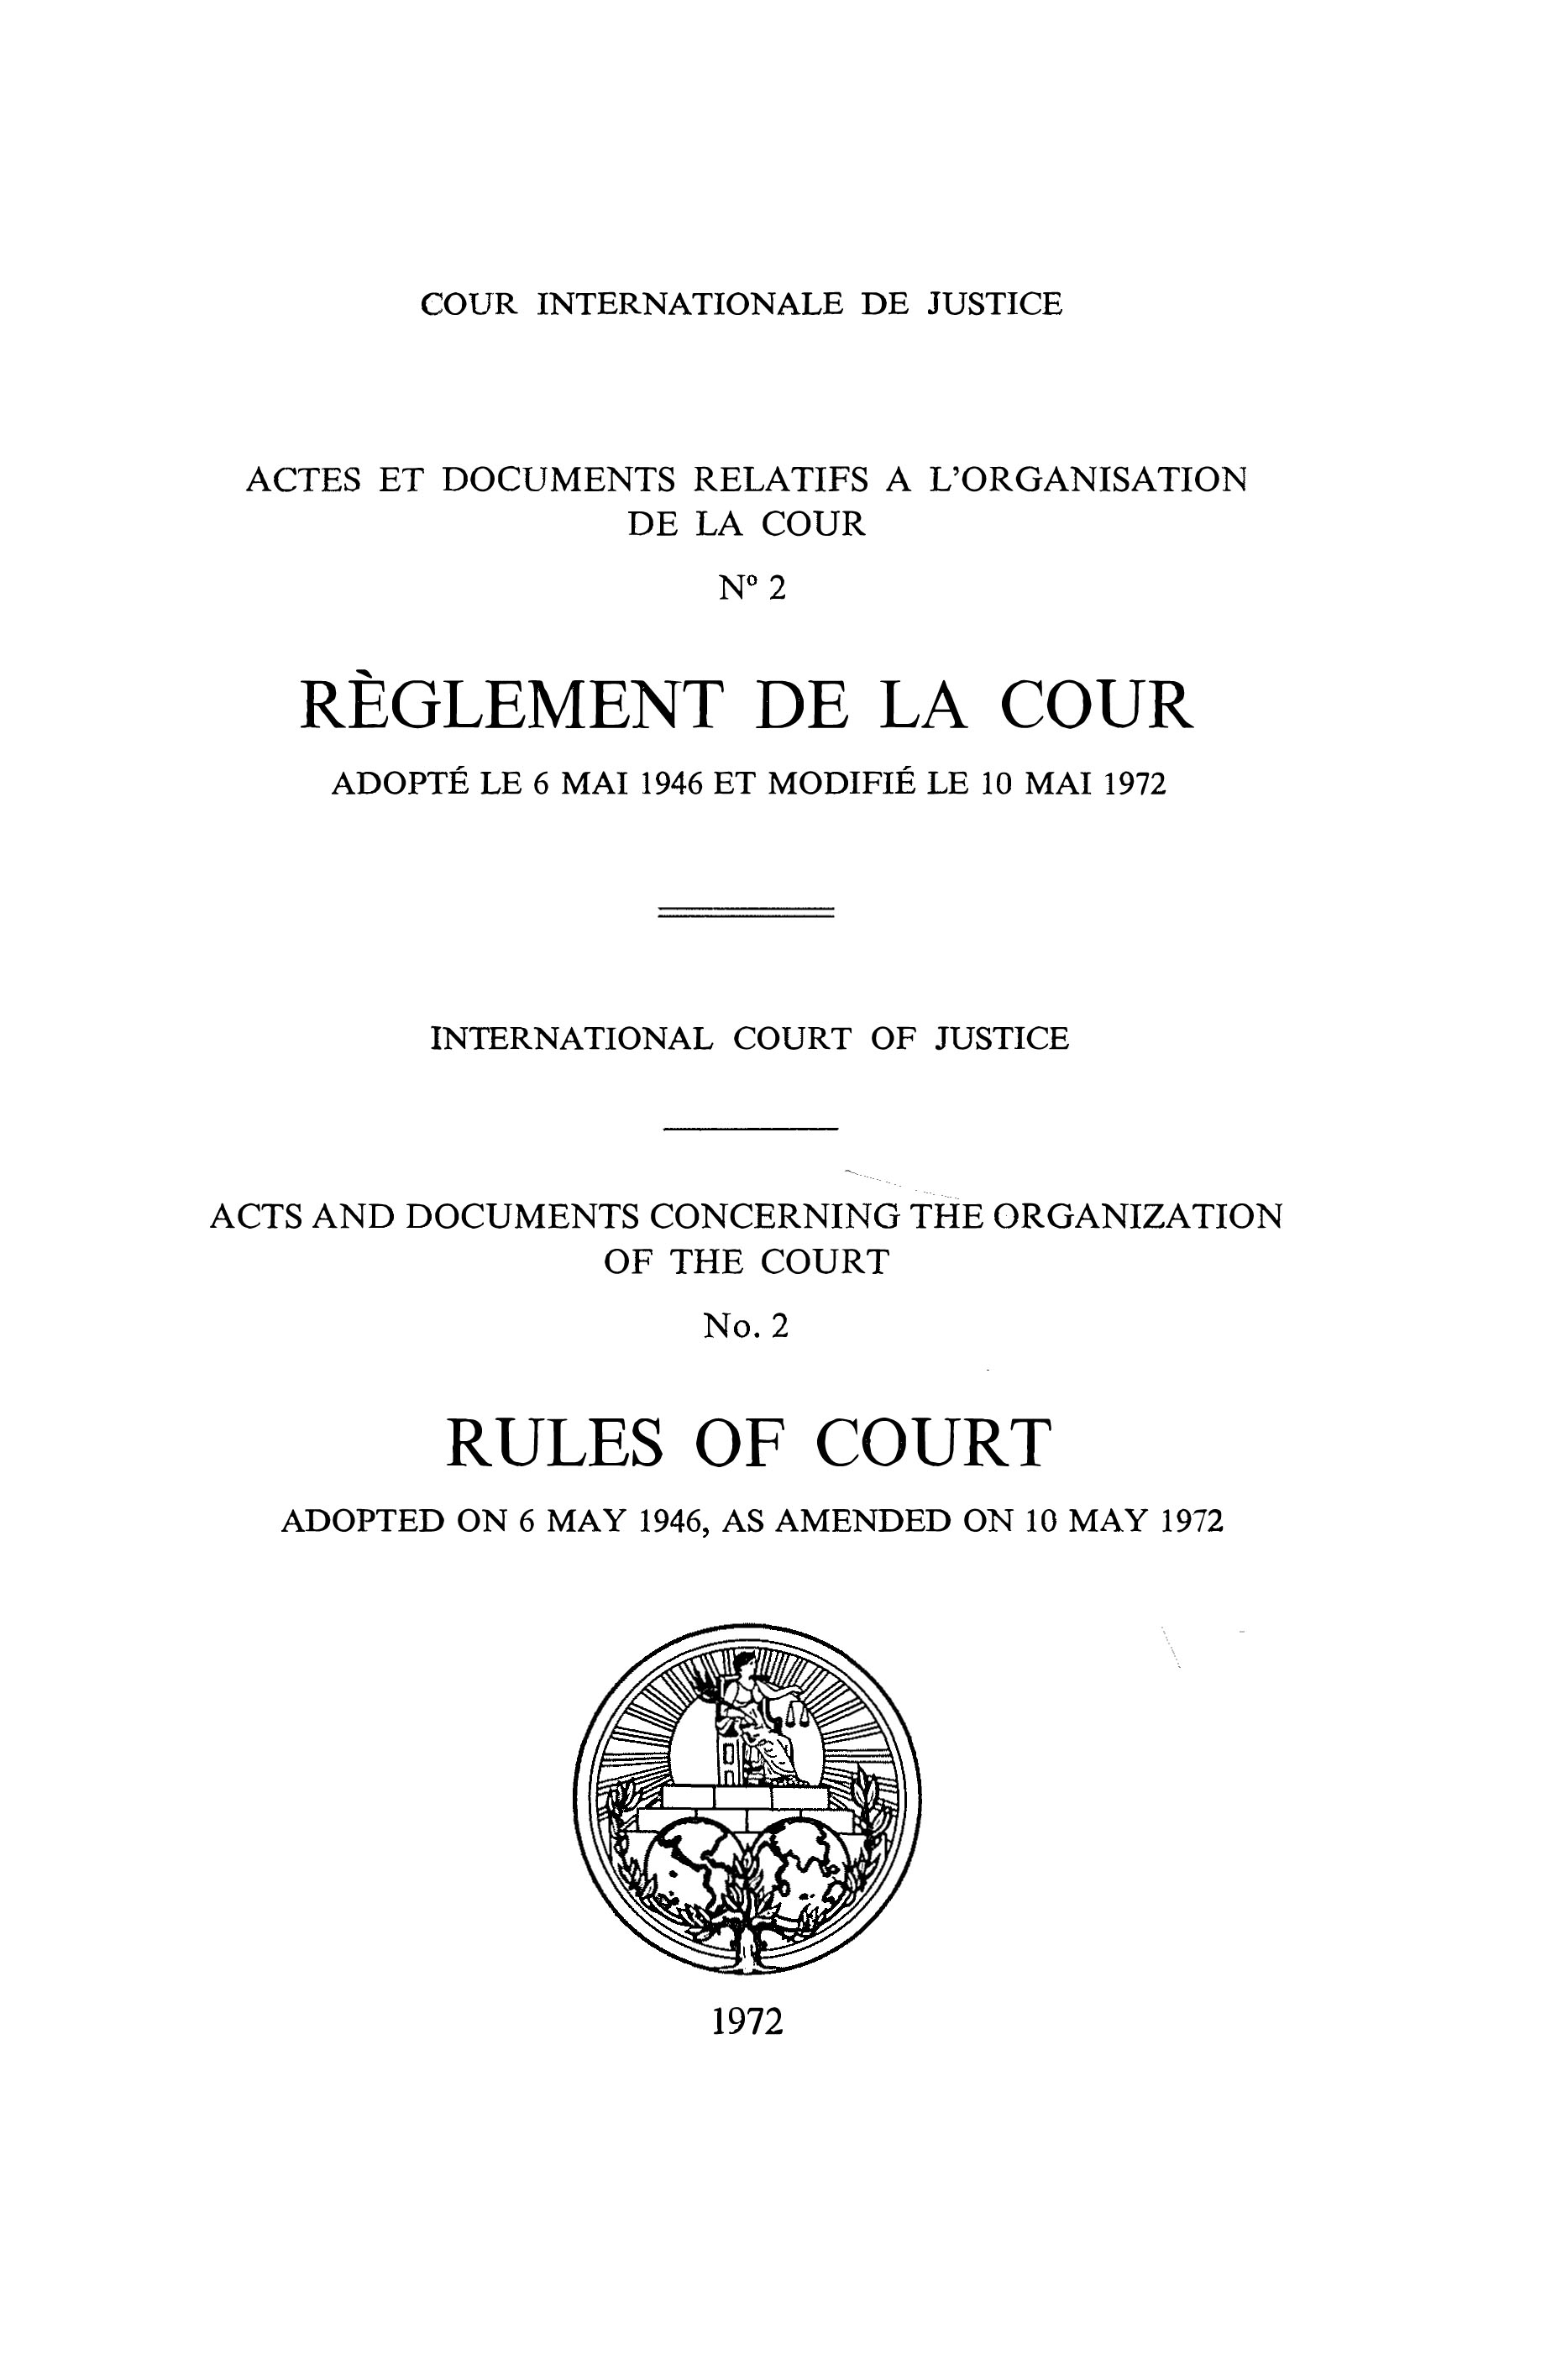 image of Acts and Documents Concerning the Organization of the Court No. 2